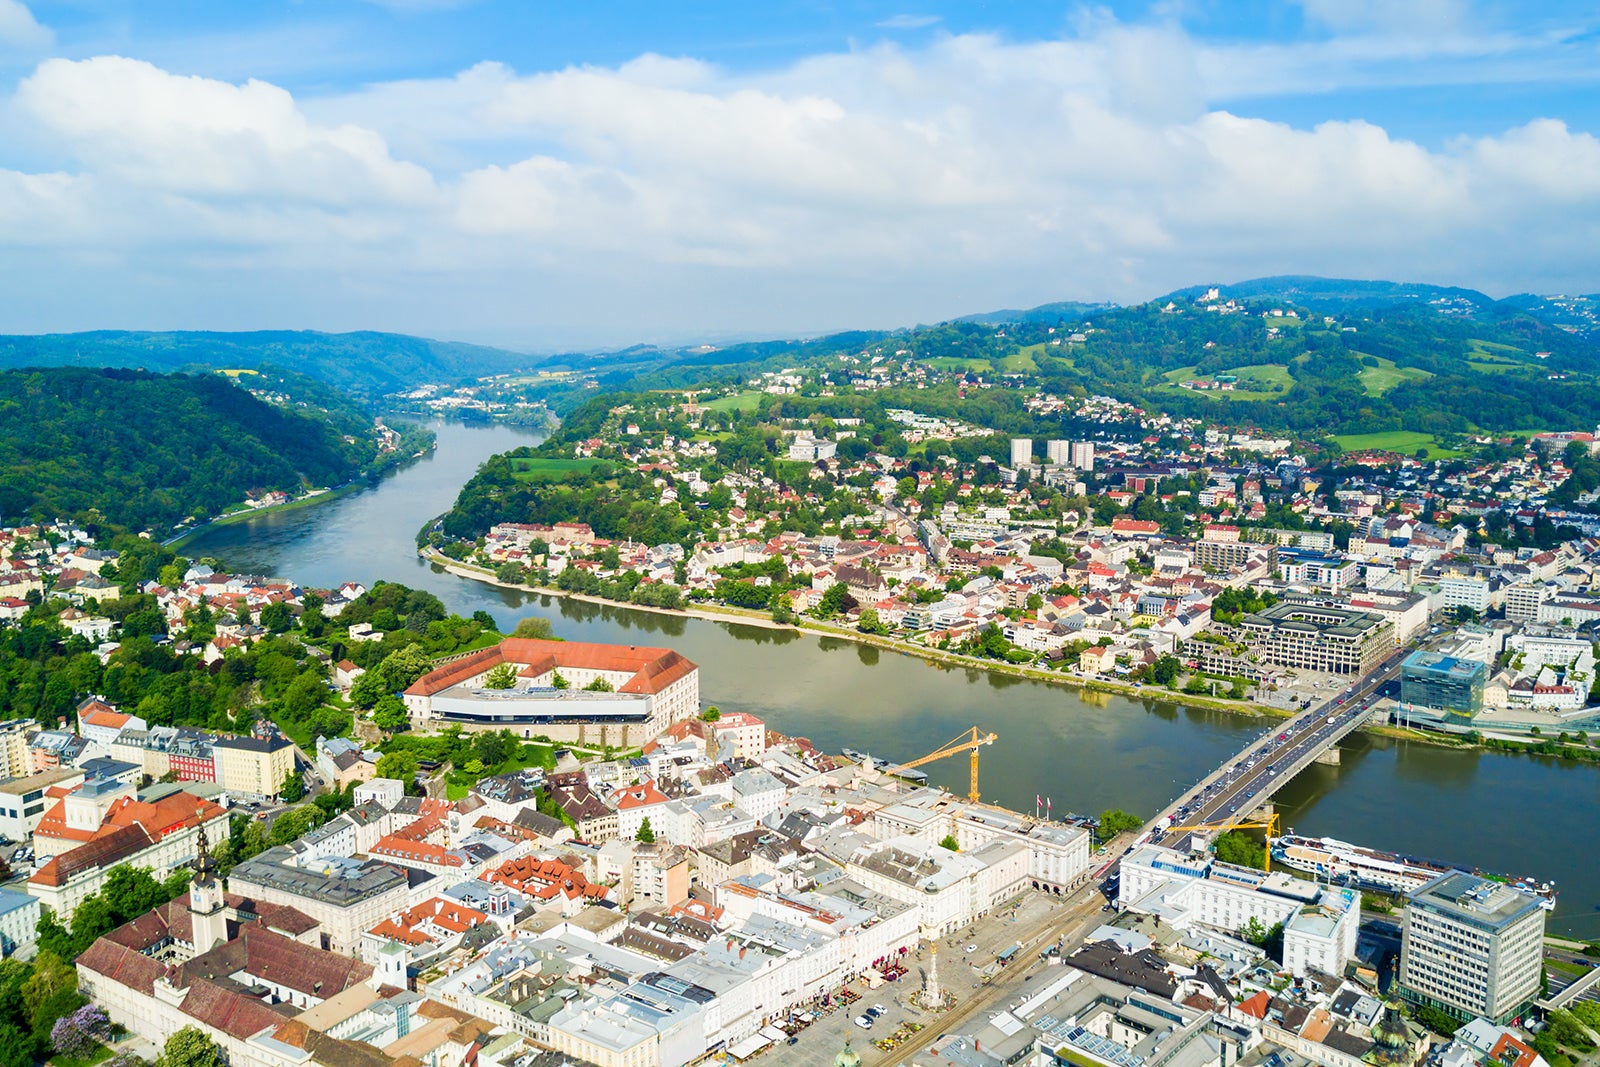 An aerial view of a portion of the Danube River as it runs through Linz